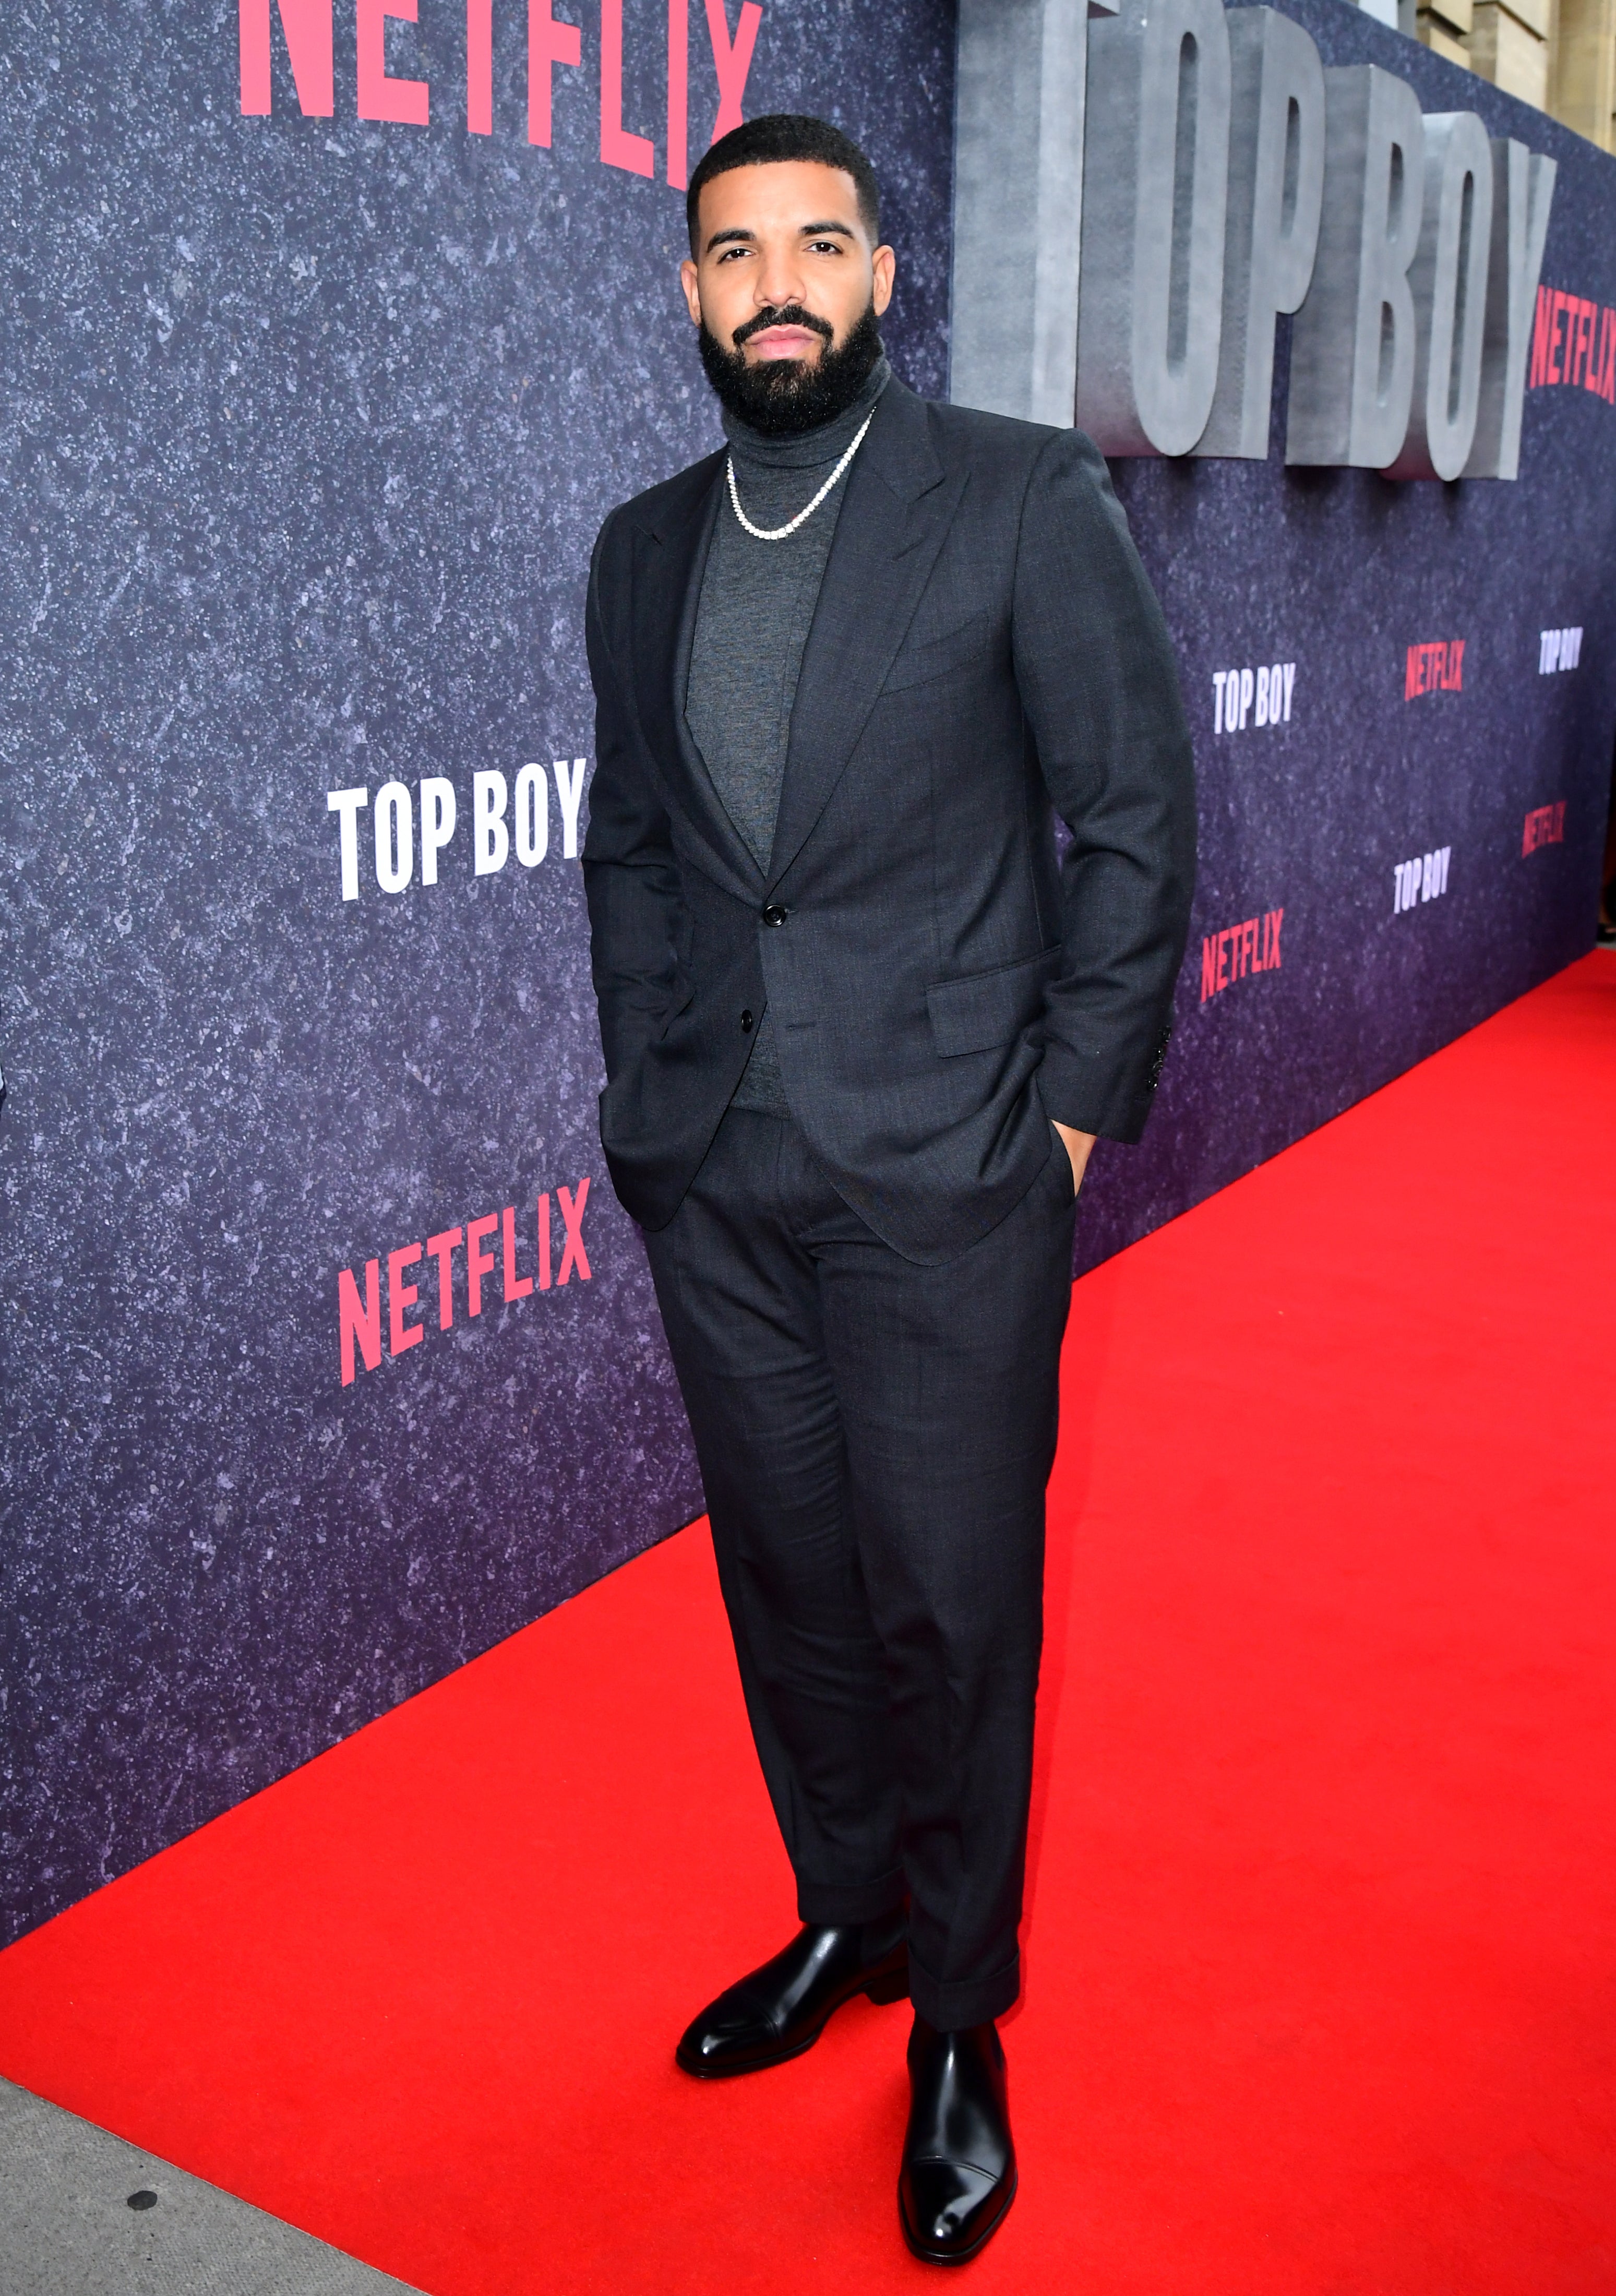 Drake attending the UK premiere of Top Boy at the Hackney Picturehouse in London (Ian West/PA)